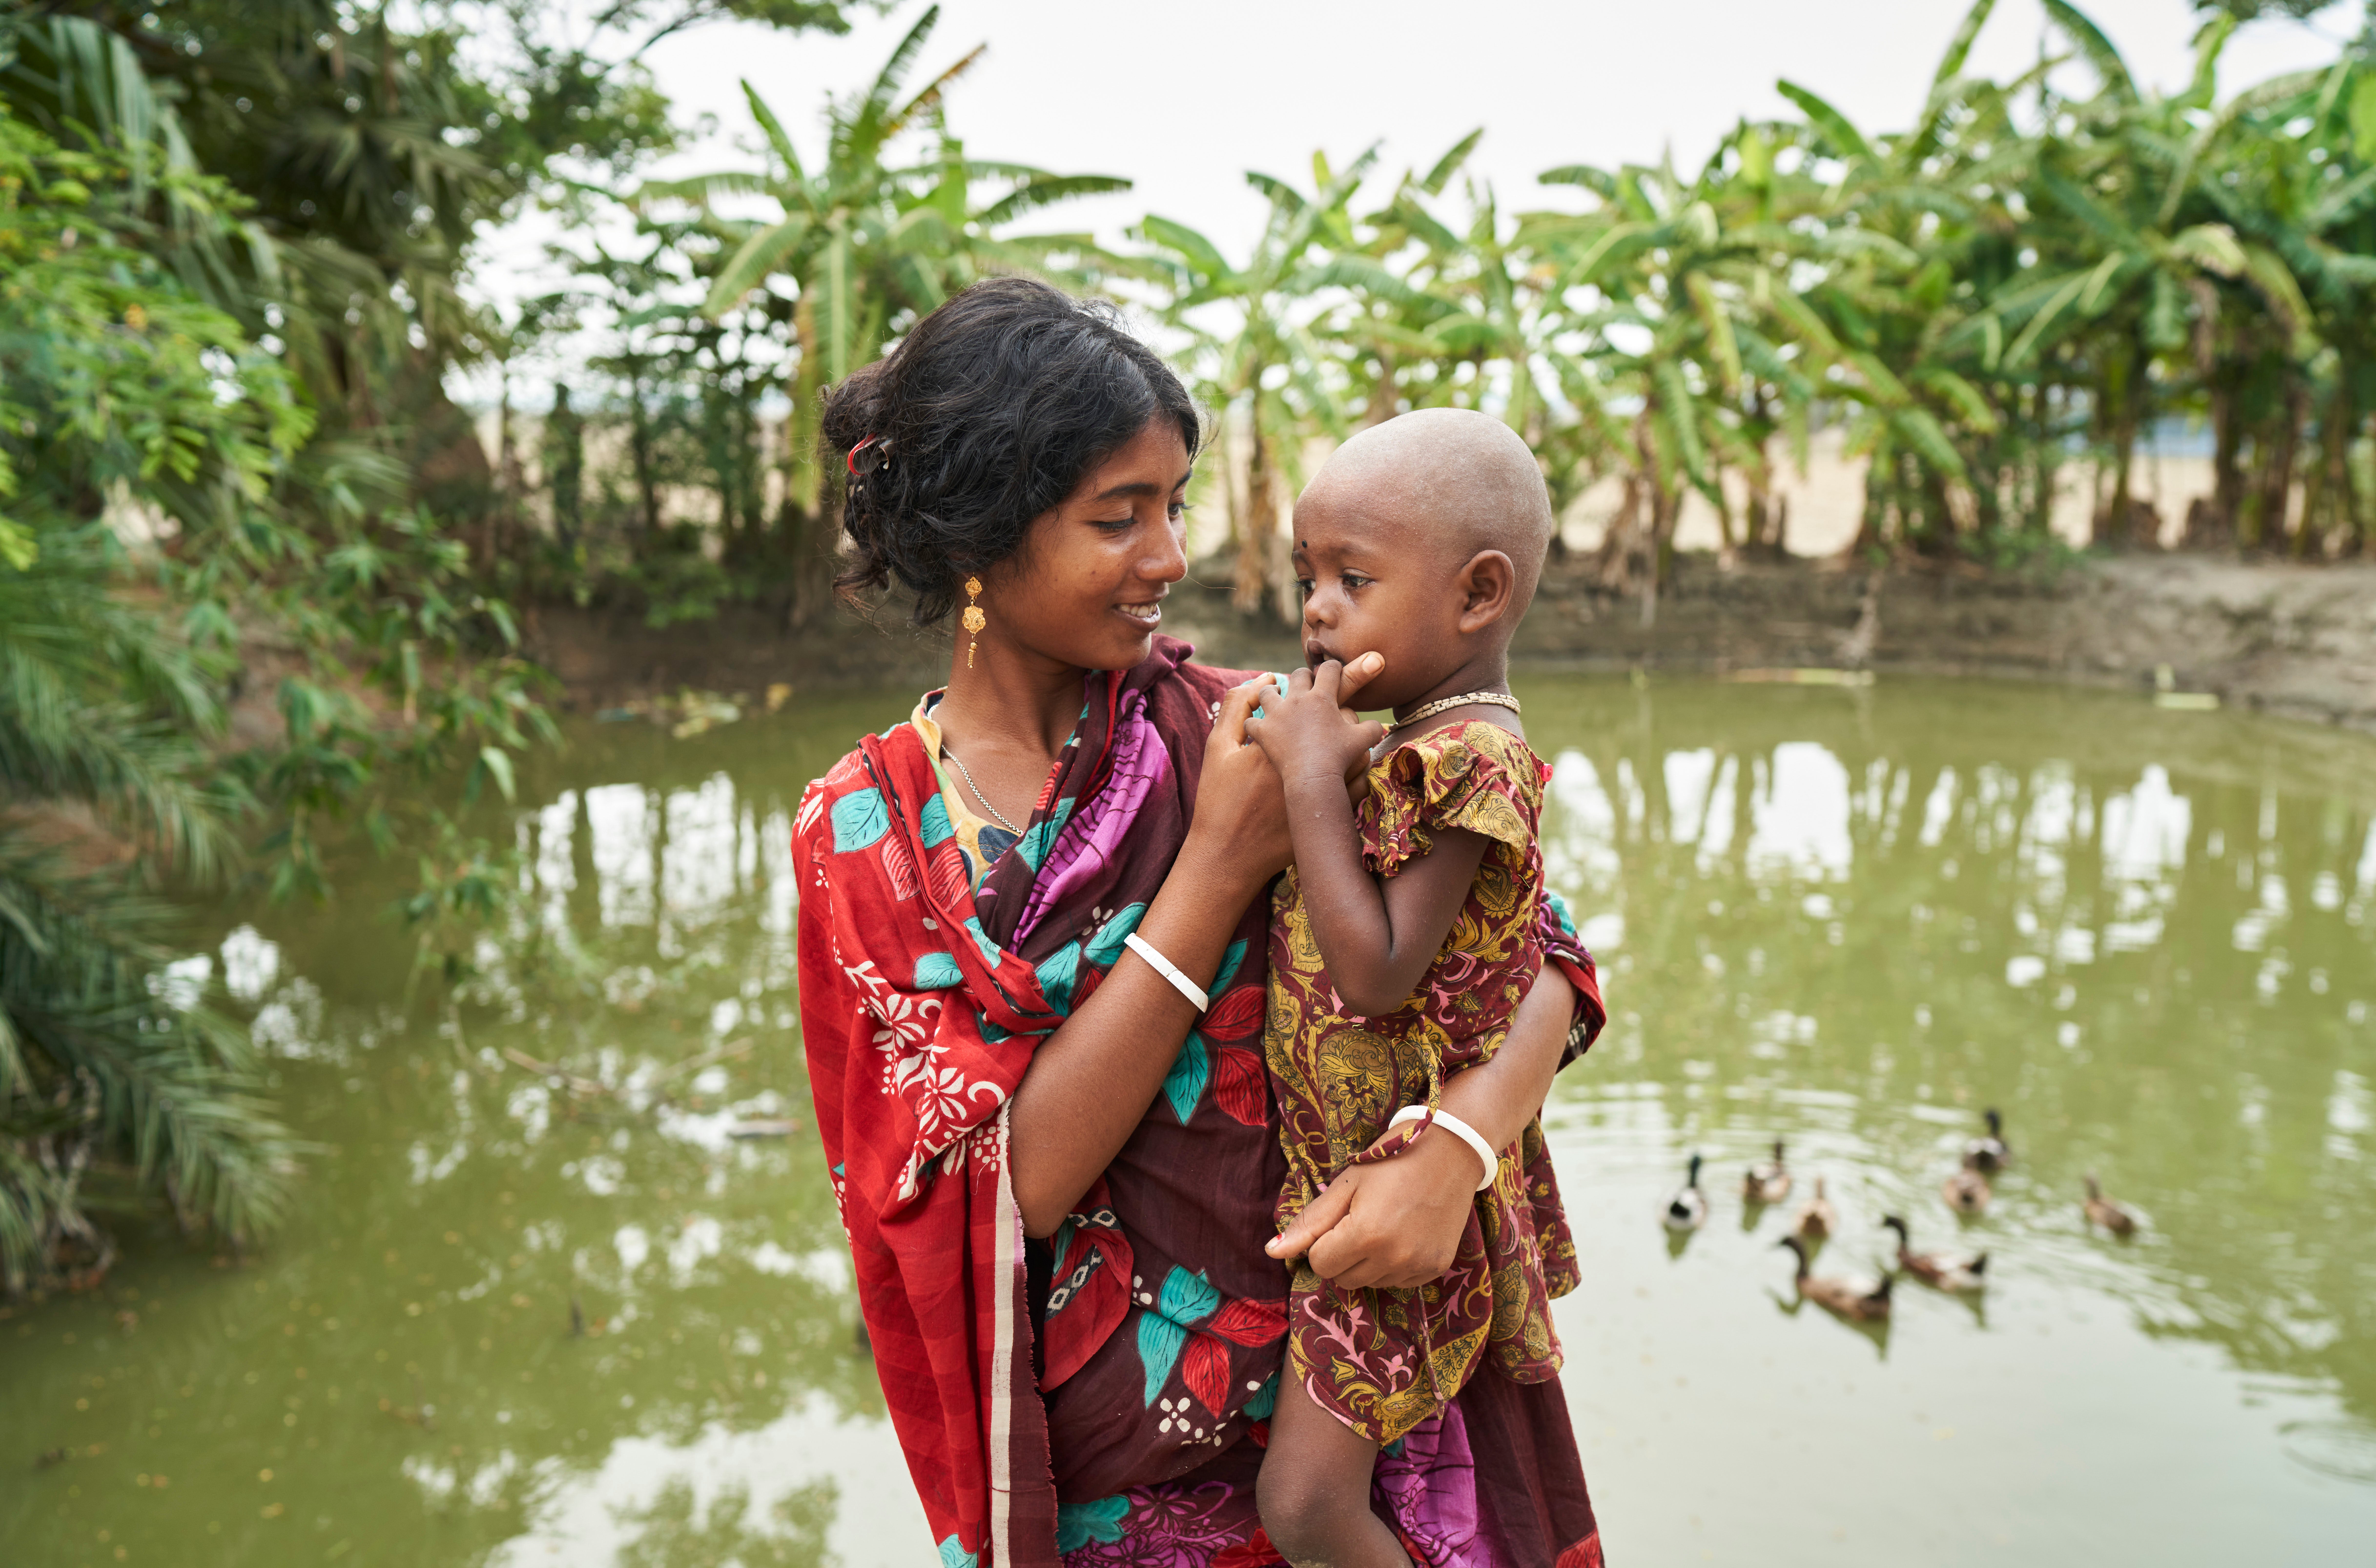 Jhorna, 22, and her daughter Obonita, 3, in front of the pond they use for washing